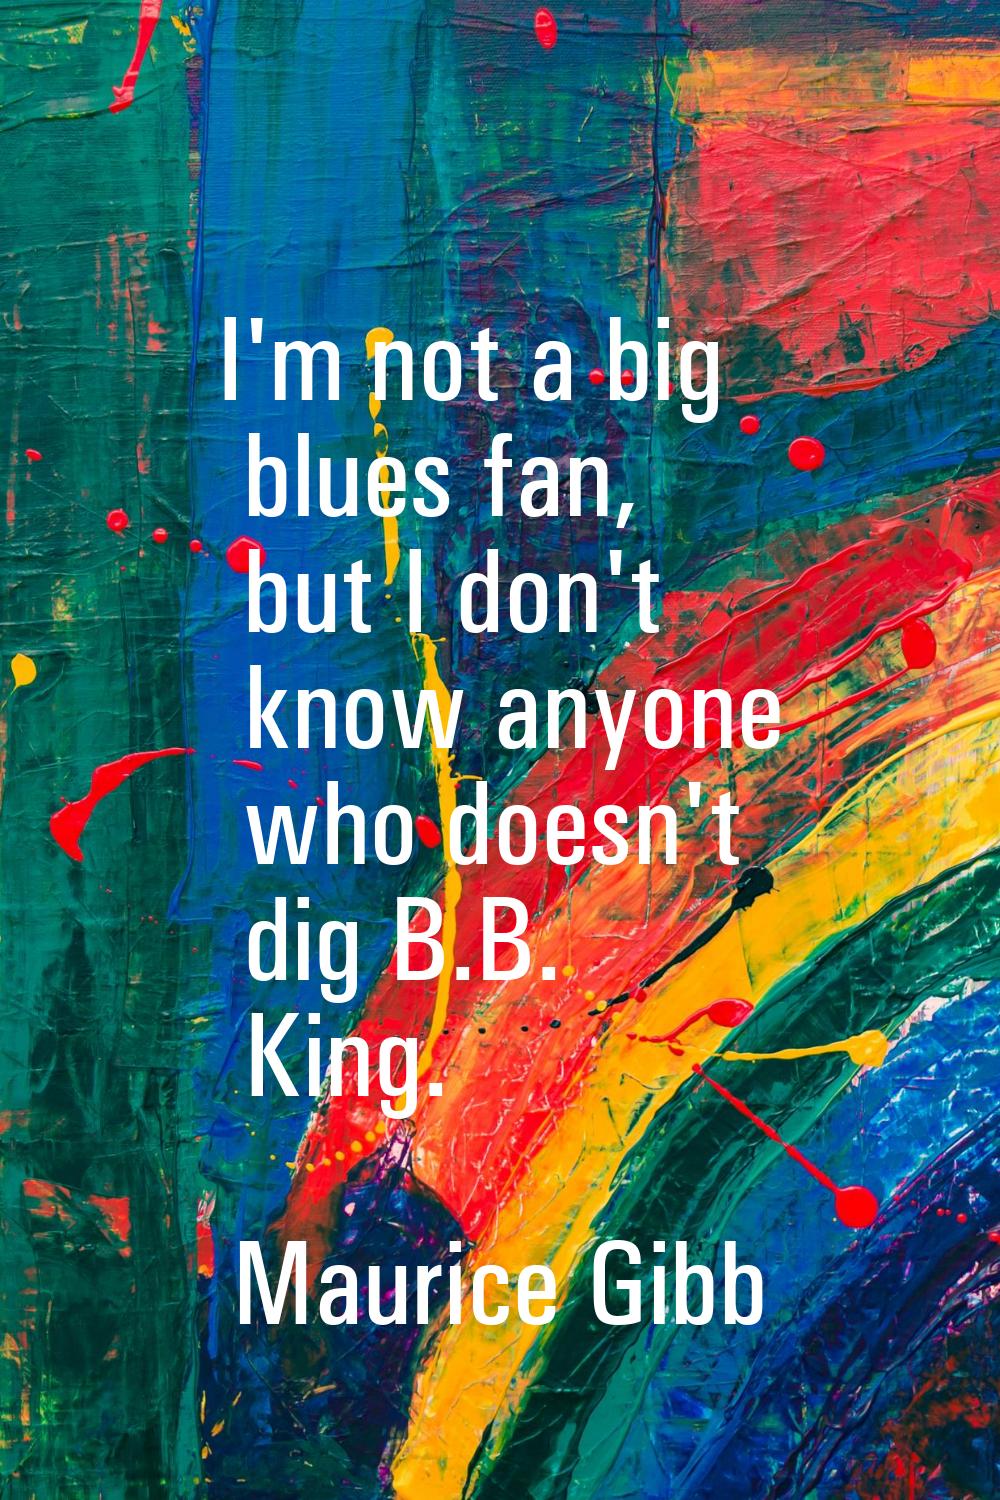 I'm not a big blues fan, but I don't know anyone who doesn't dig B.B. King.